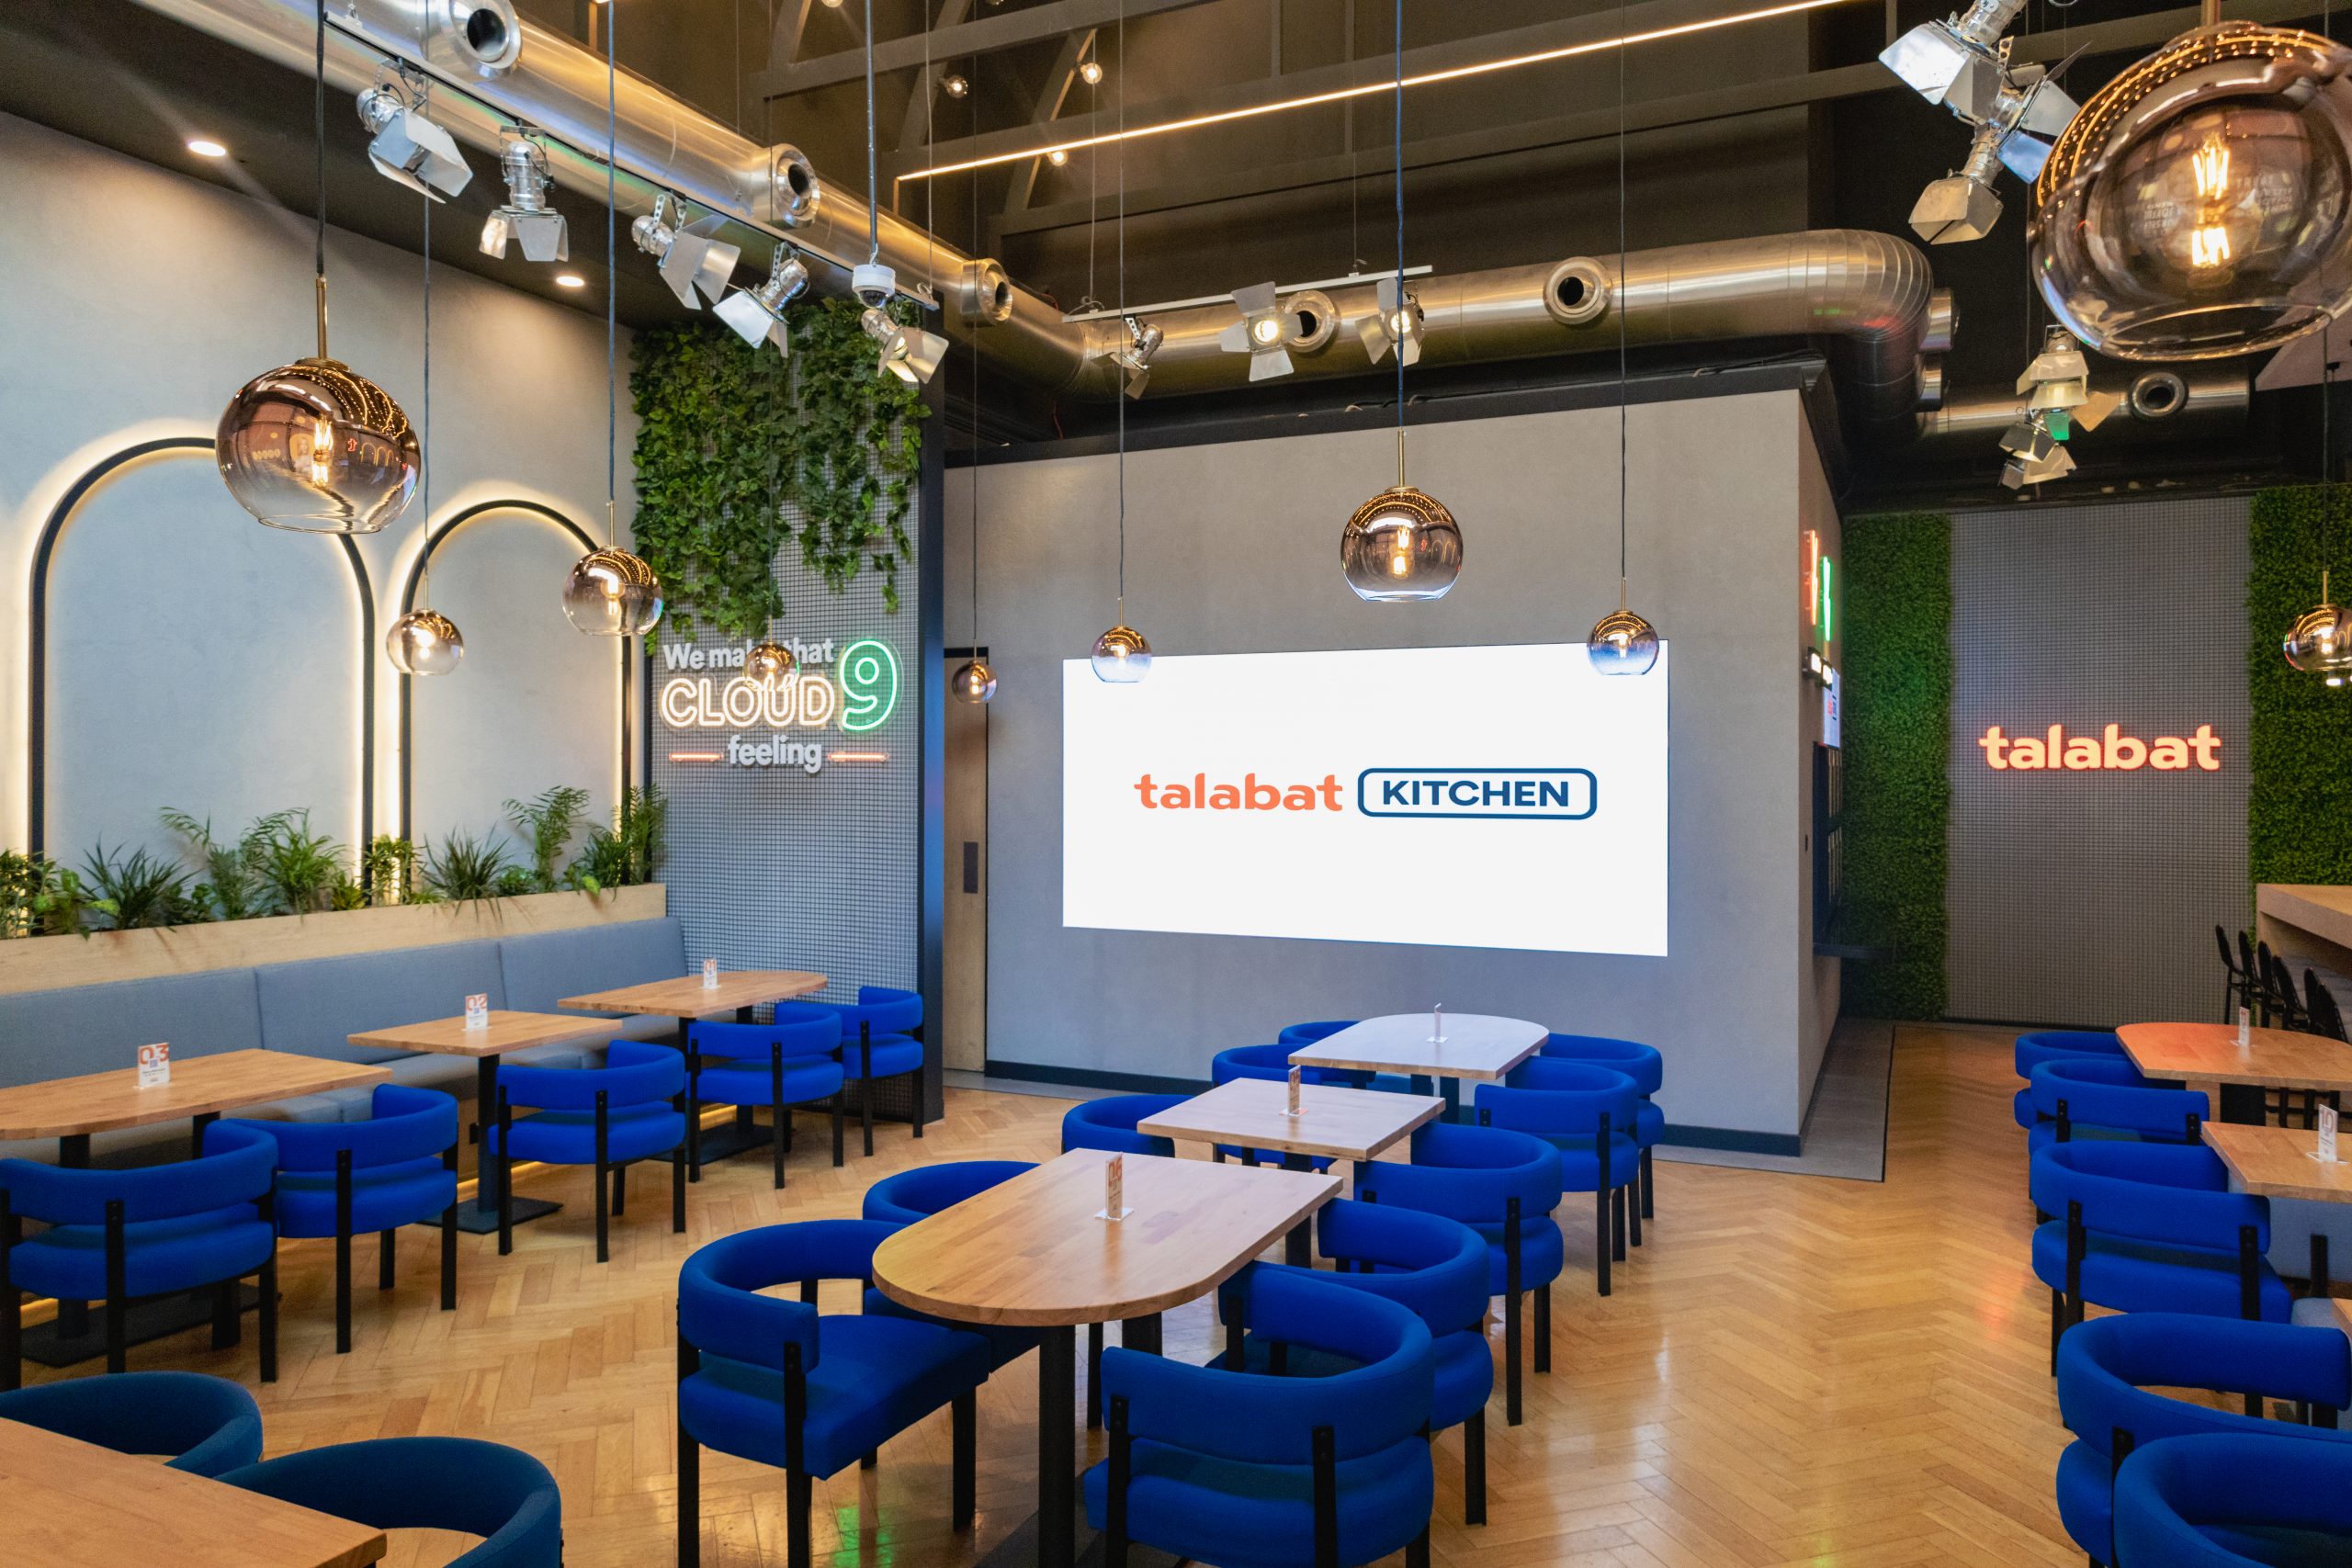 talabat LAUNCHES AN EXPERIENTIAL DINE-IN KITCHEN CONCEPT IN ITS TECH HEADQUARTERS AT CITY WALK, DUBAI